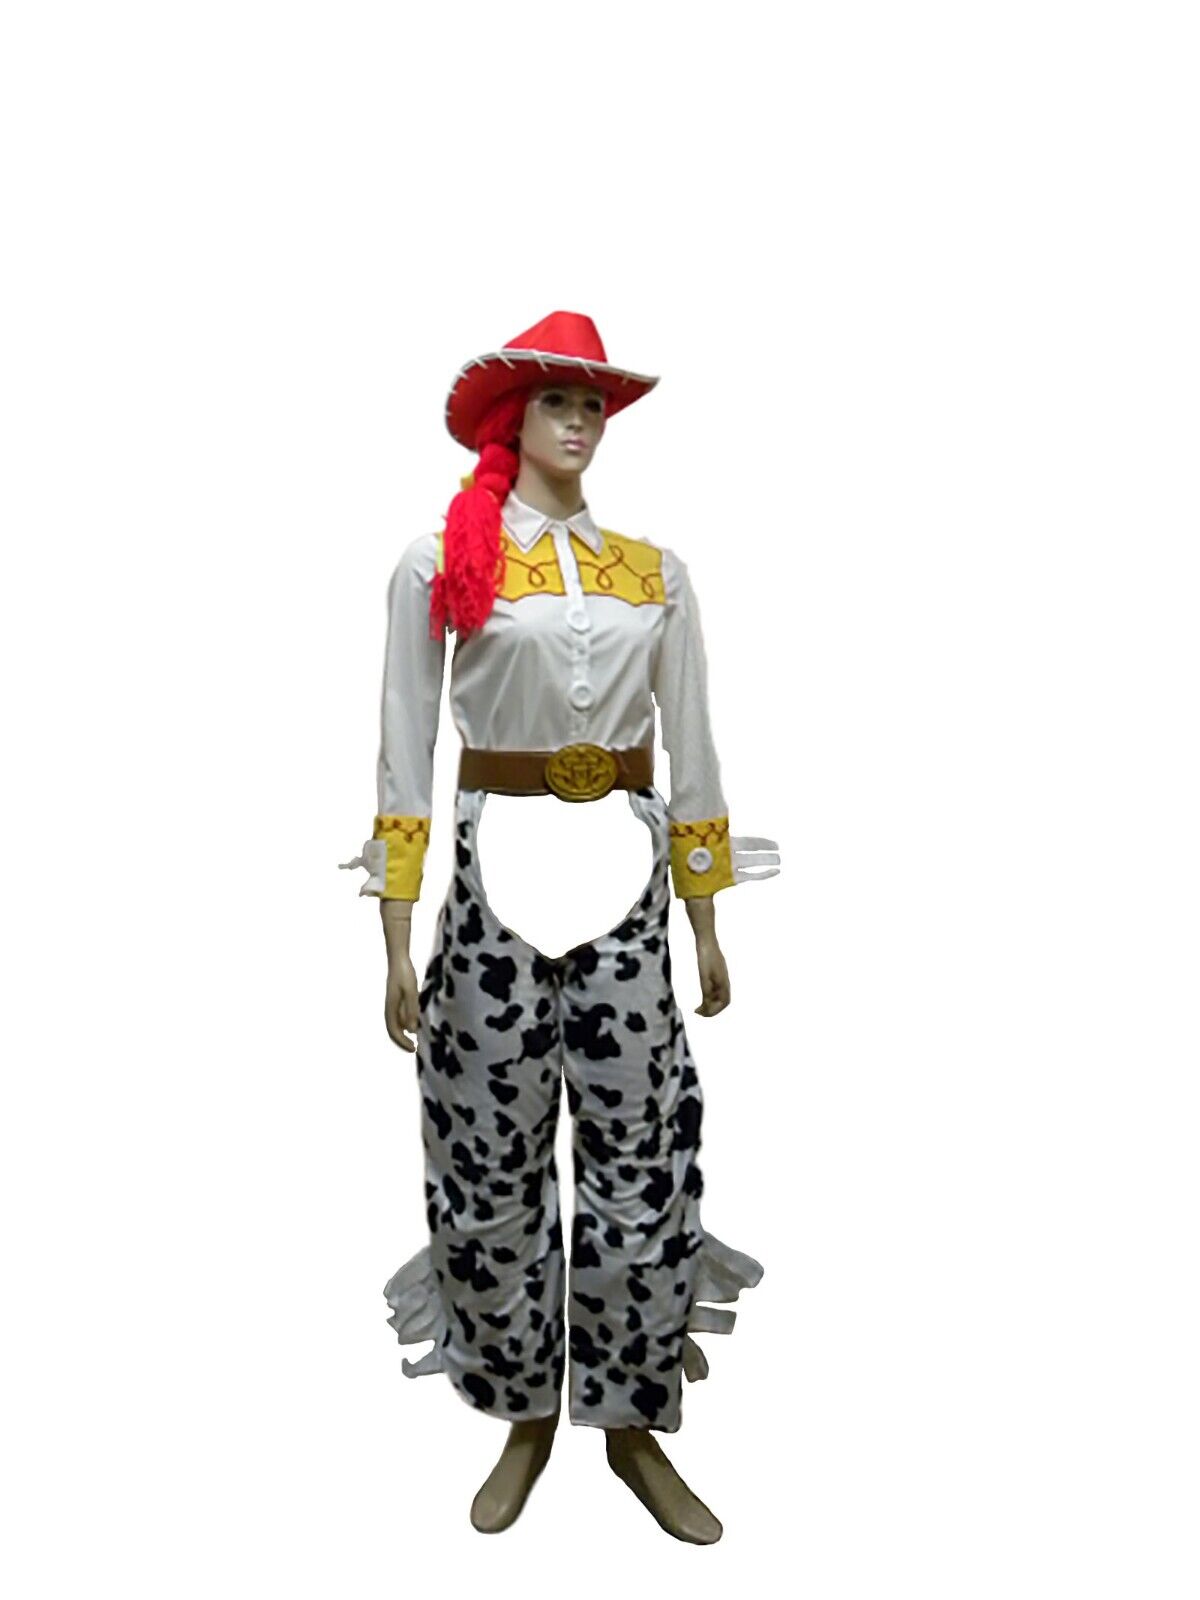 New Adult 6 Piece Disney Pixar Toy Story Jessie Costume Shirt with Chaps front